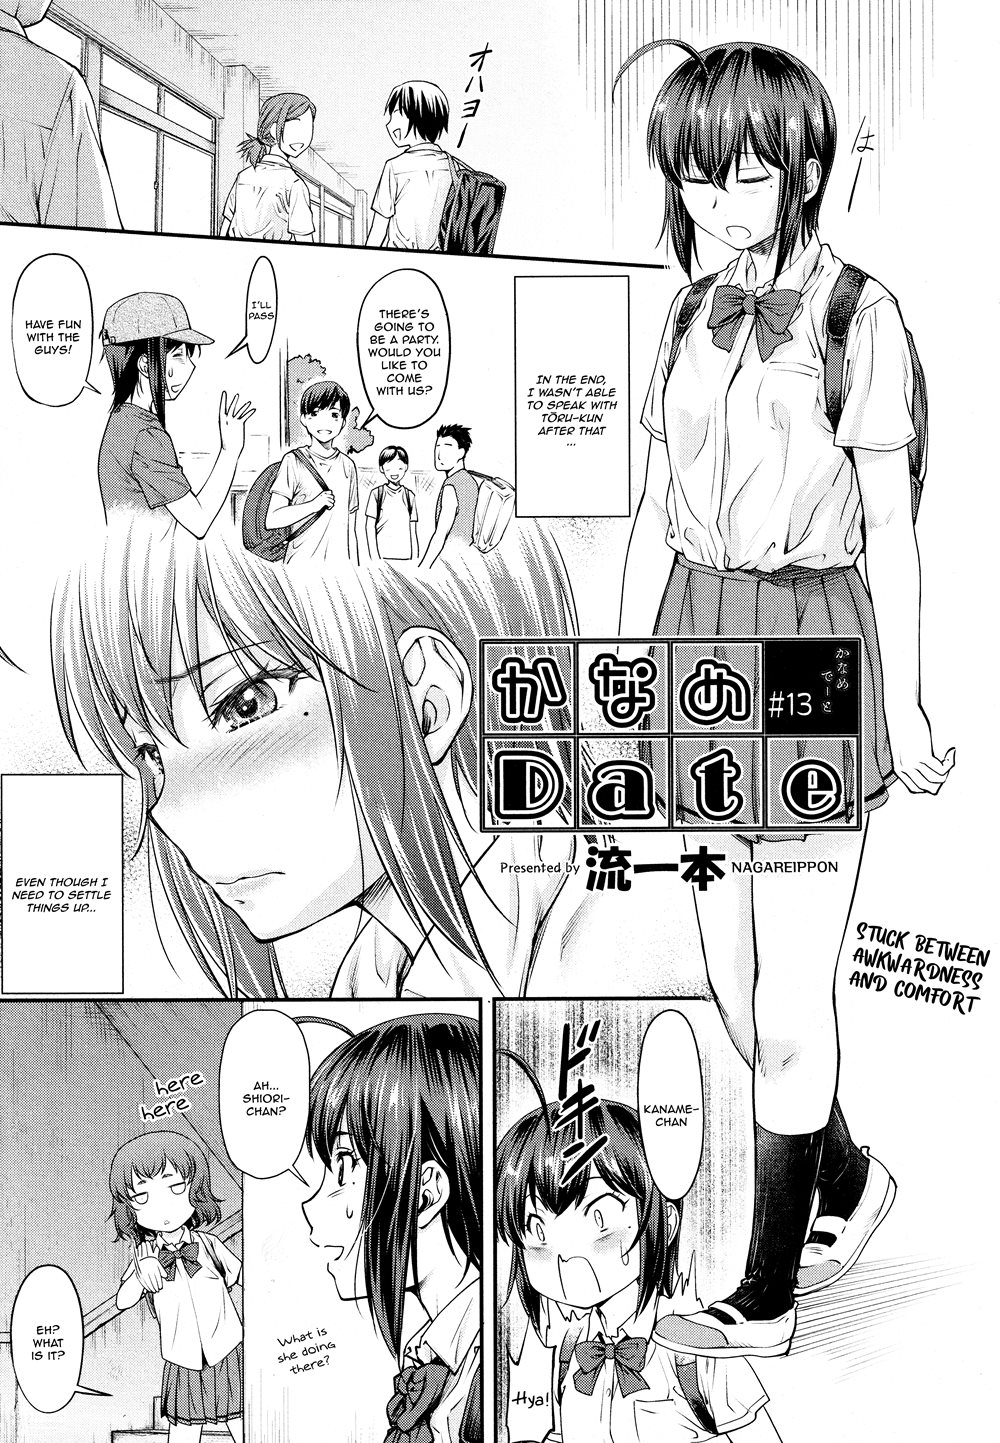 Page 1 | Kaname Date Jou (Original) - Chapter 14: Kaname Date Jou 13 by  NAGARE Ippon at HentaiHere.com